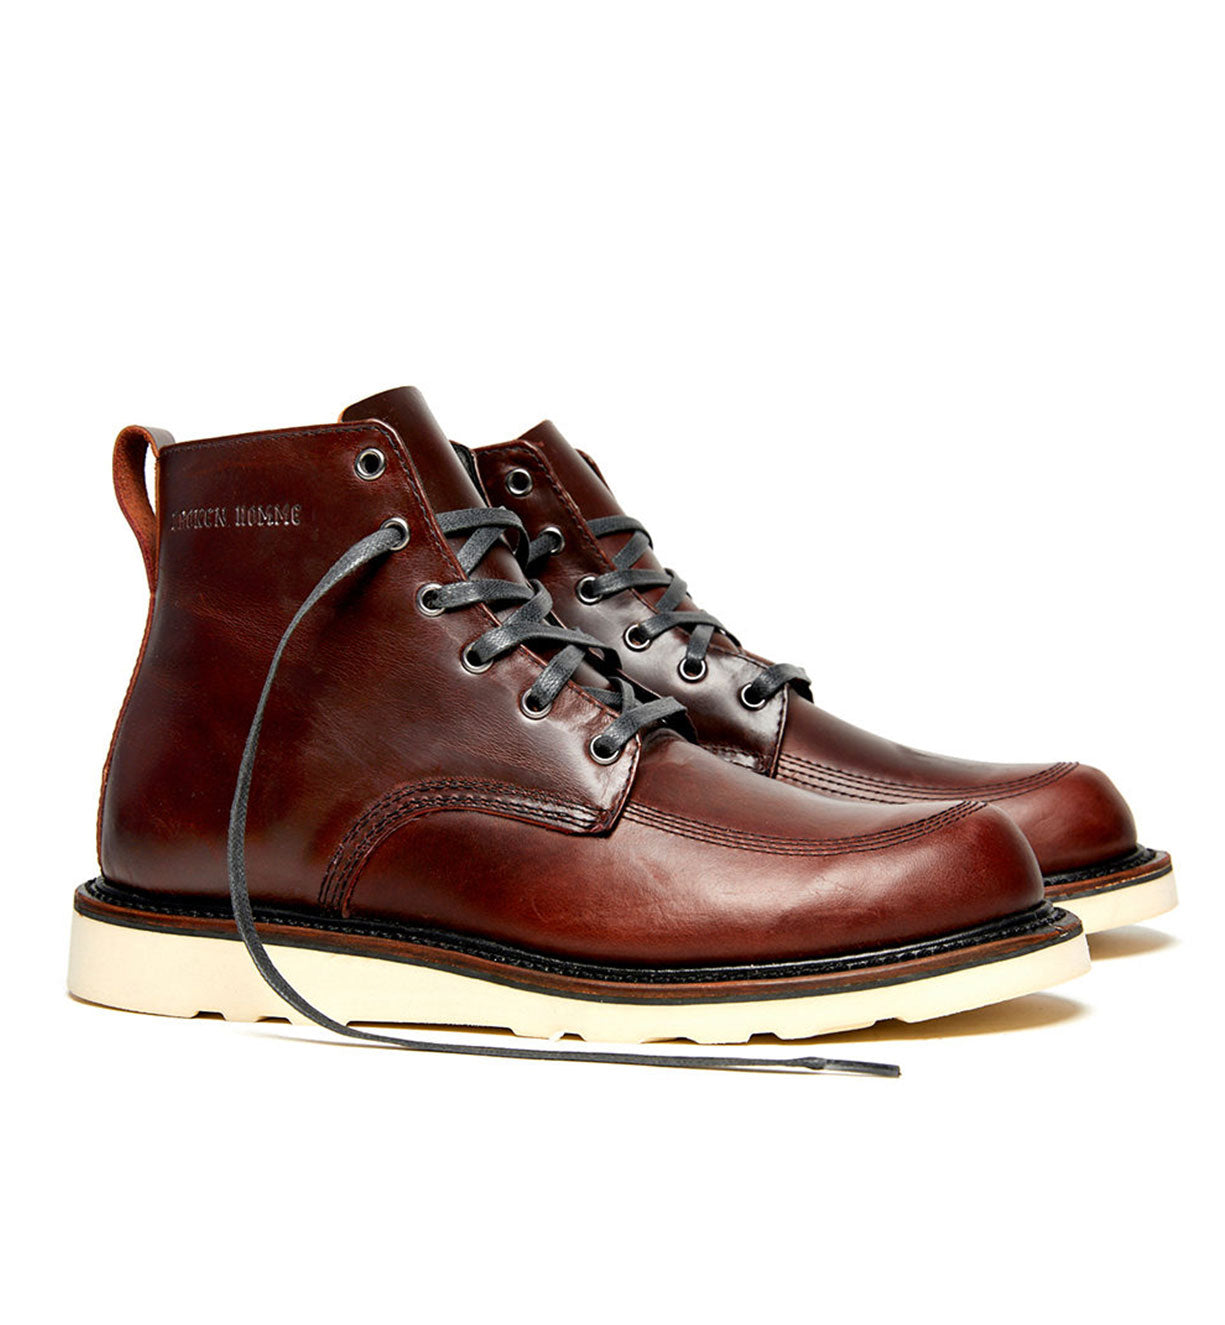 A pair of brown leather Broken Homme Jaime Boots with laces and a natural wedge.